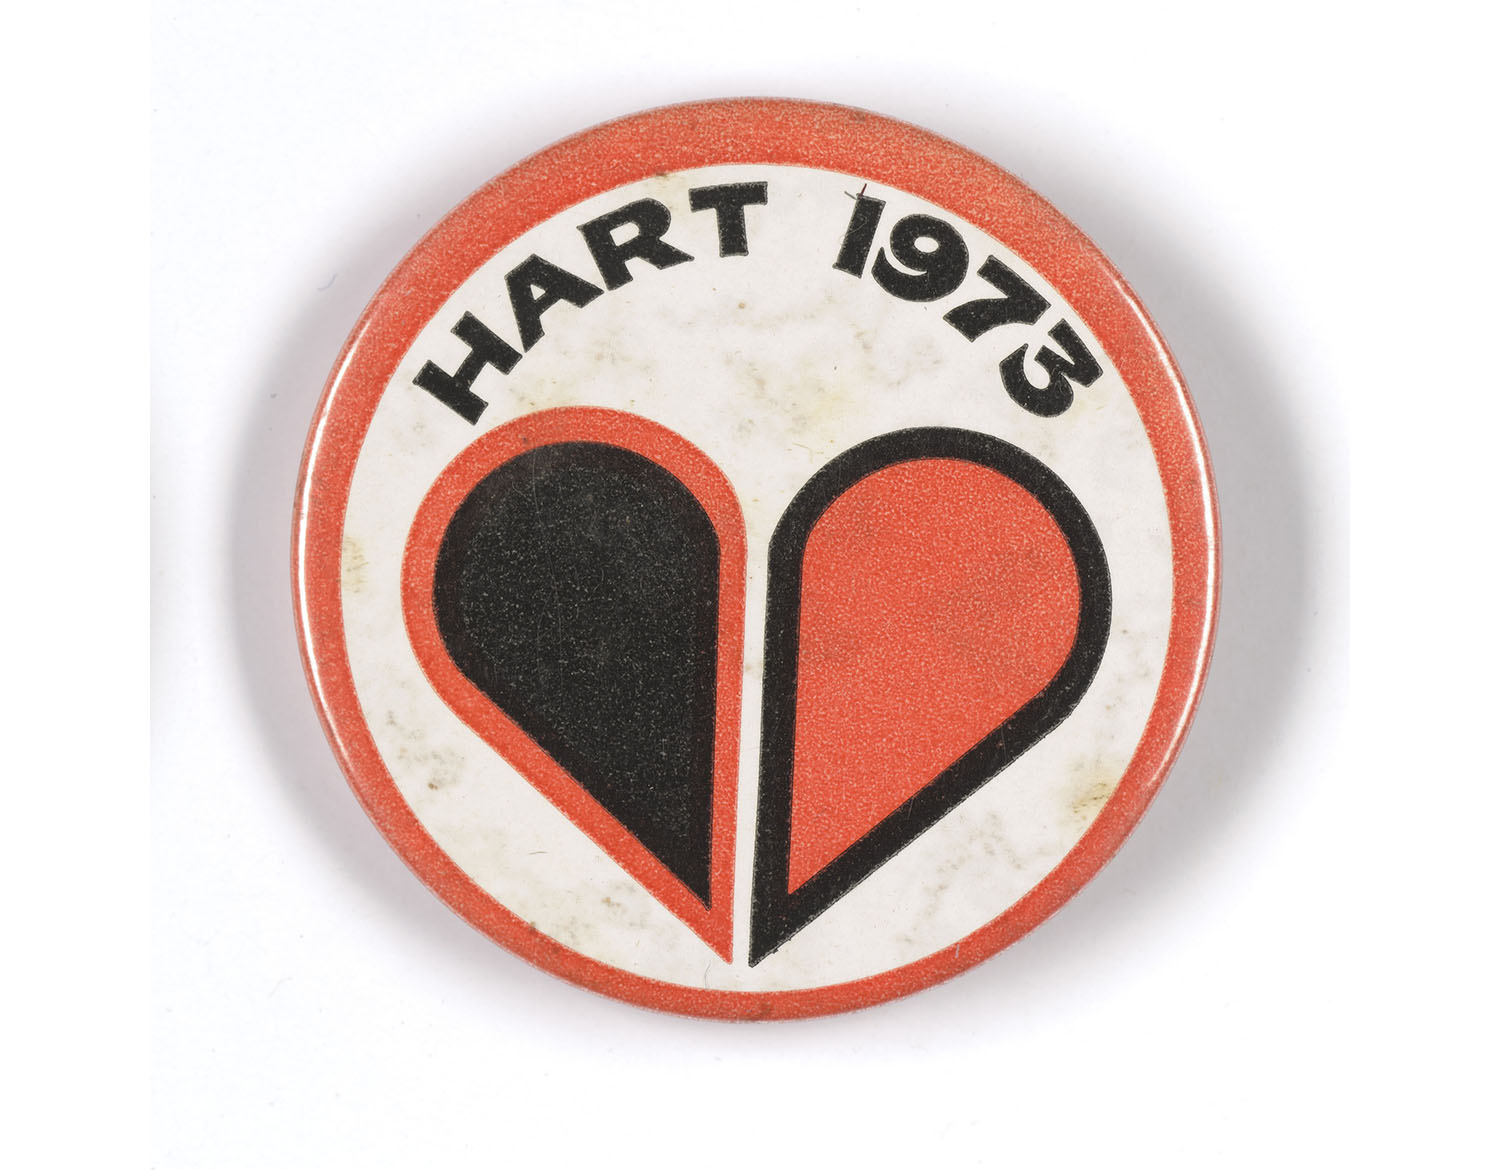 Badge with a love heart on it. The heart is in two: one black with a red border and the other red with a black border. Above the heart are the words “HART 1973”. The badge has a red border